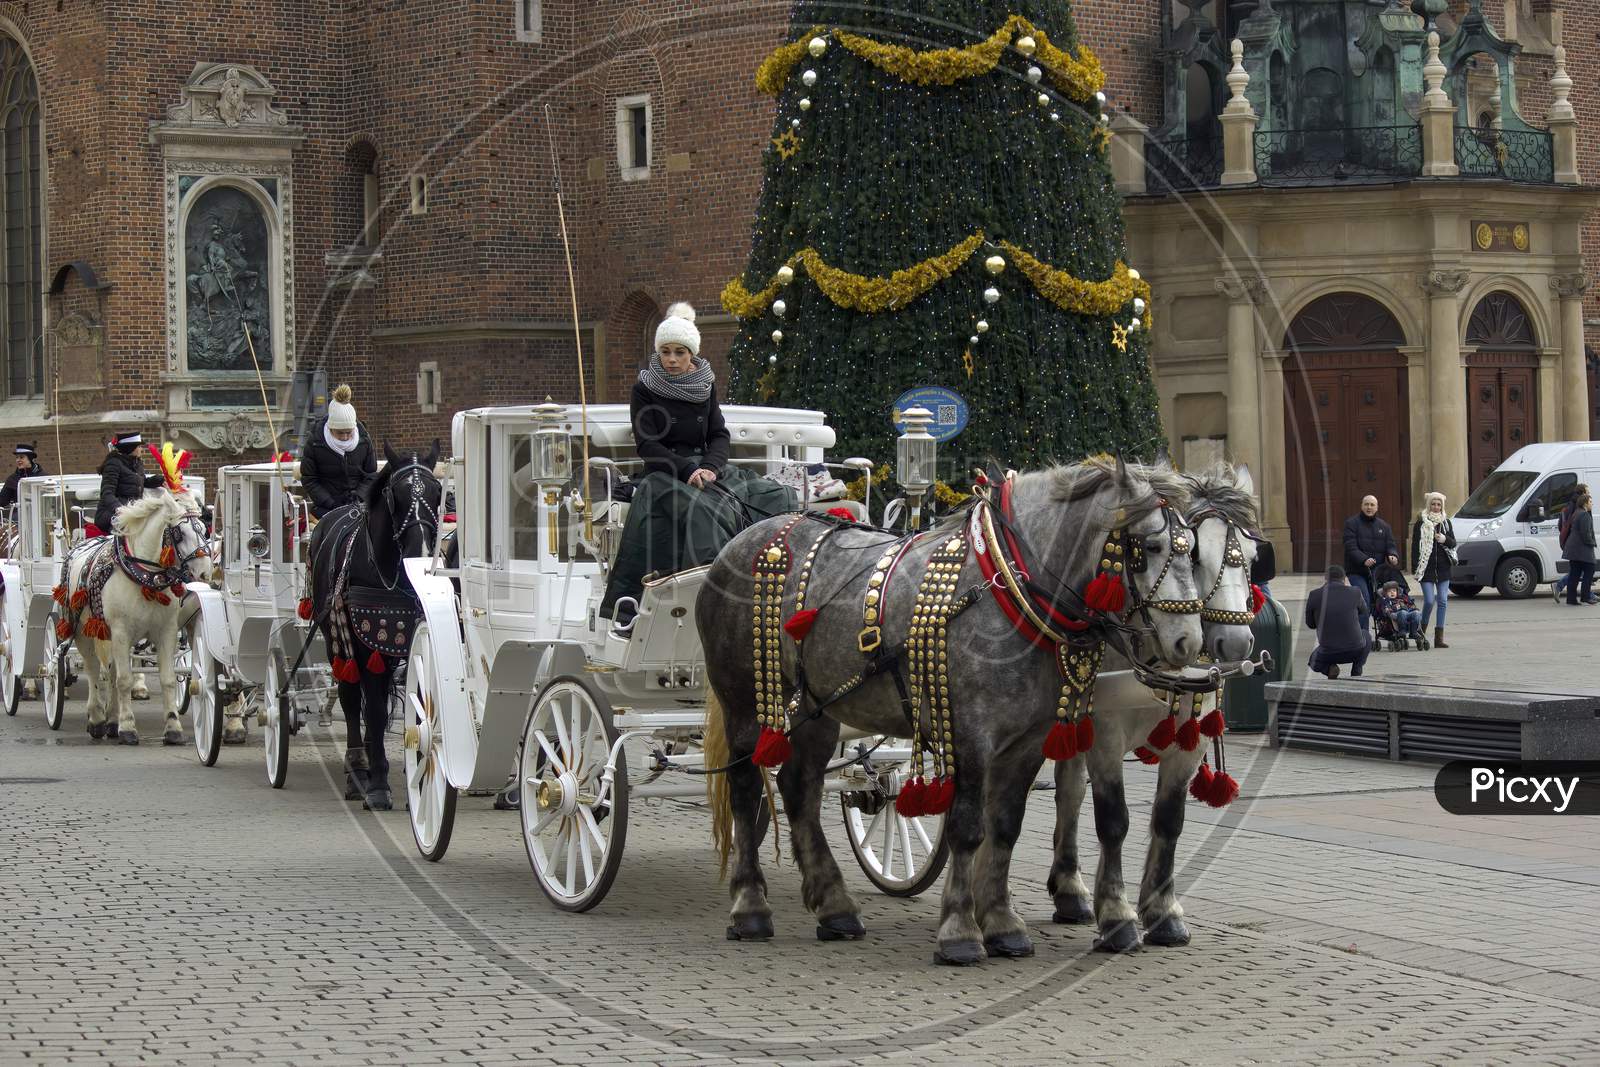 Krakow, Poland - December 23, 2014: Queue Of Horse Ride Carriage For Tourists During Christmas Eve Holidays In Winter At City Center Main Square Before X-Mas Tree